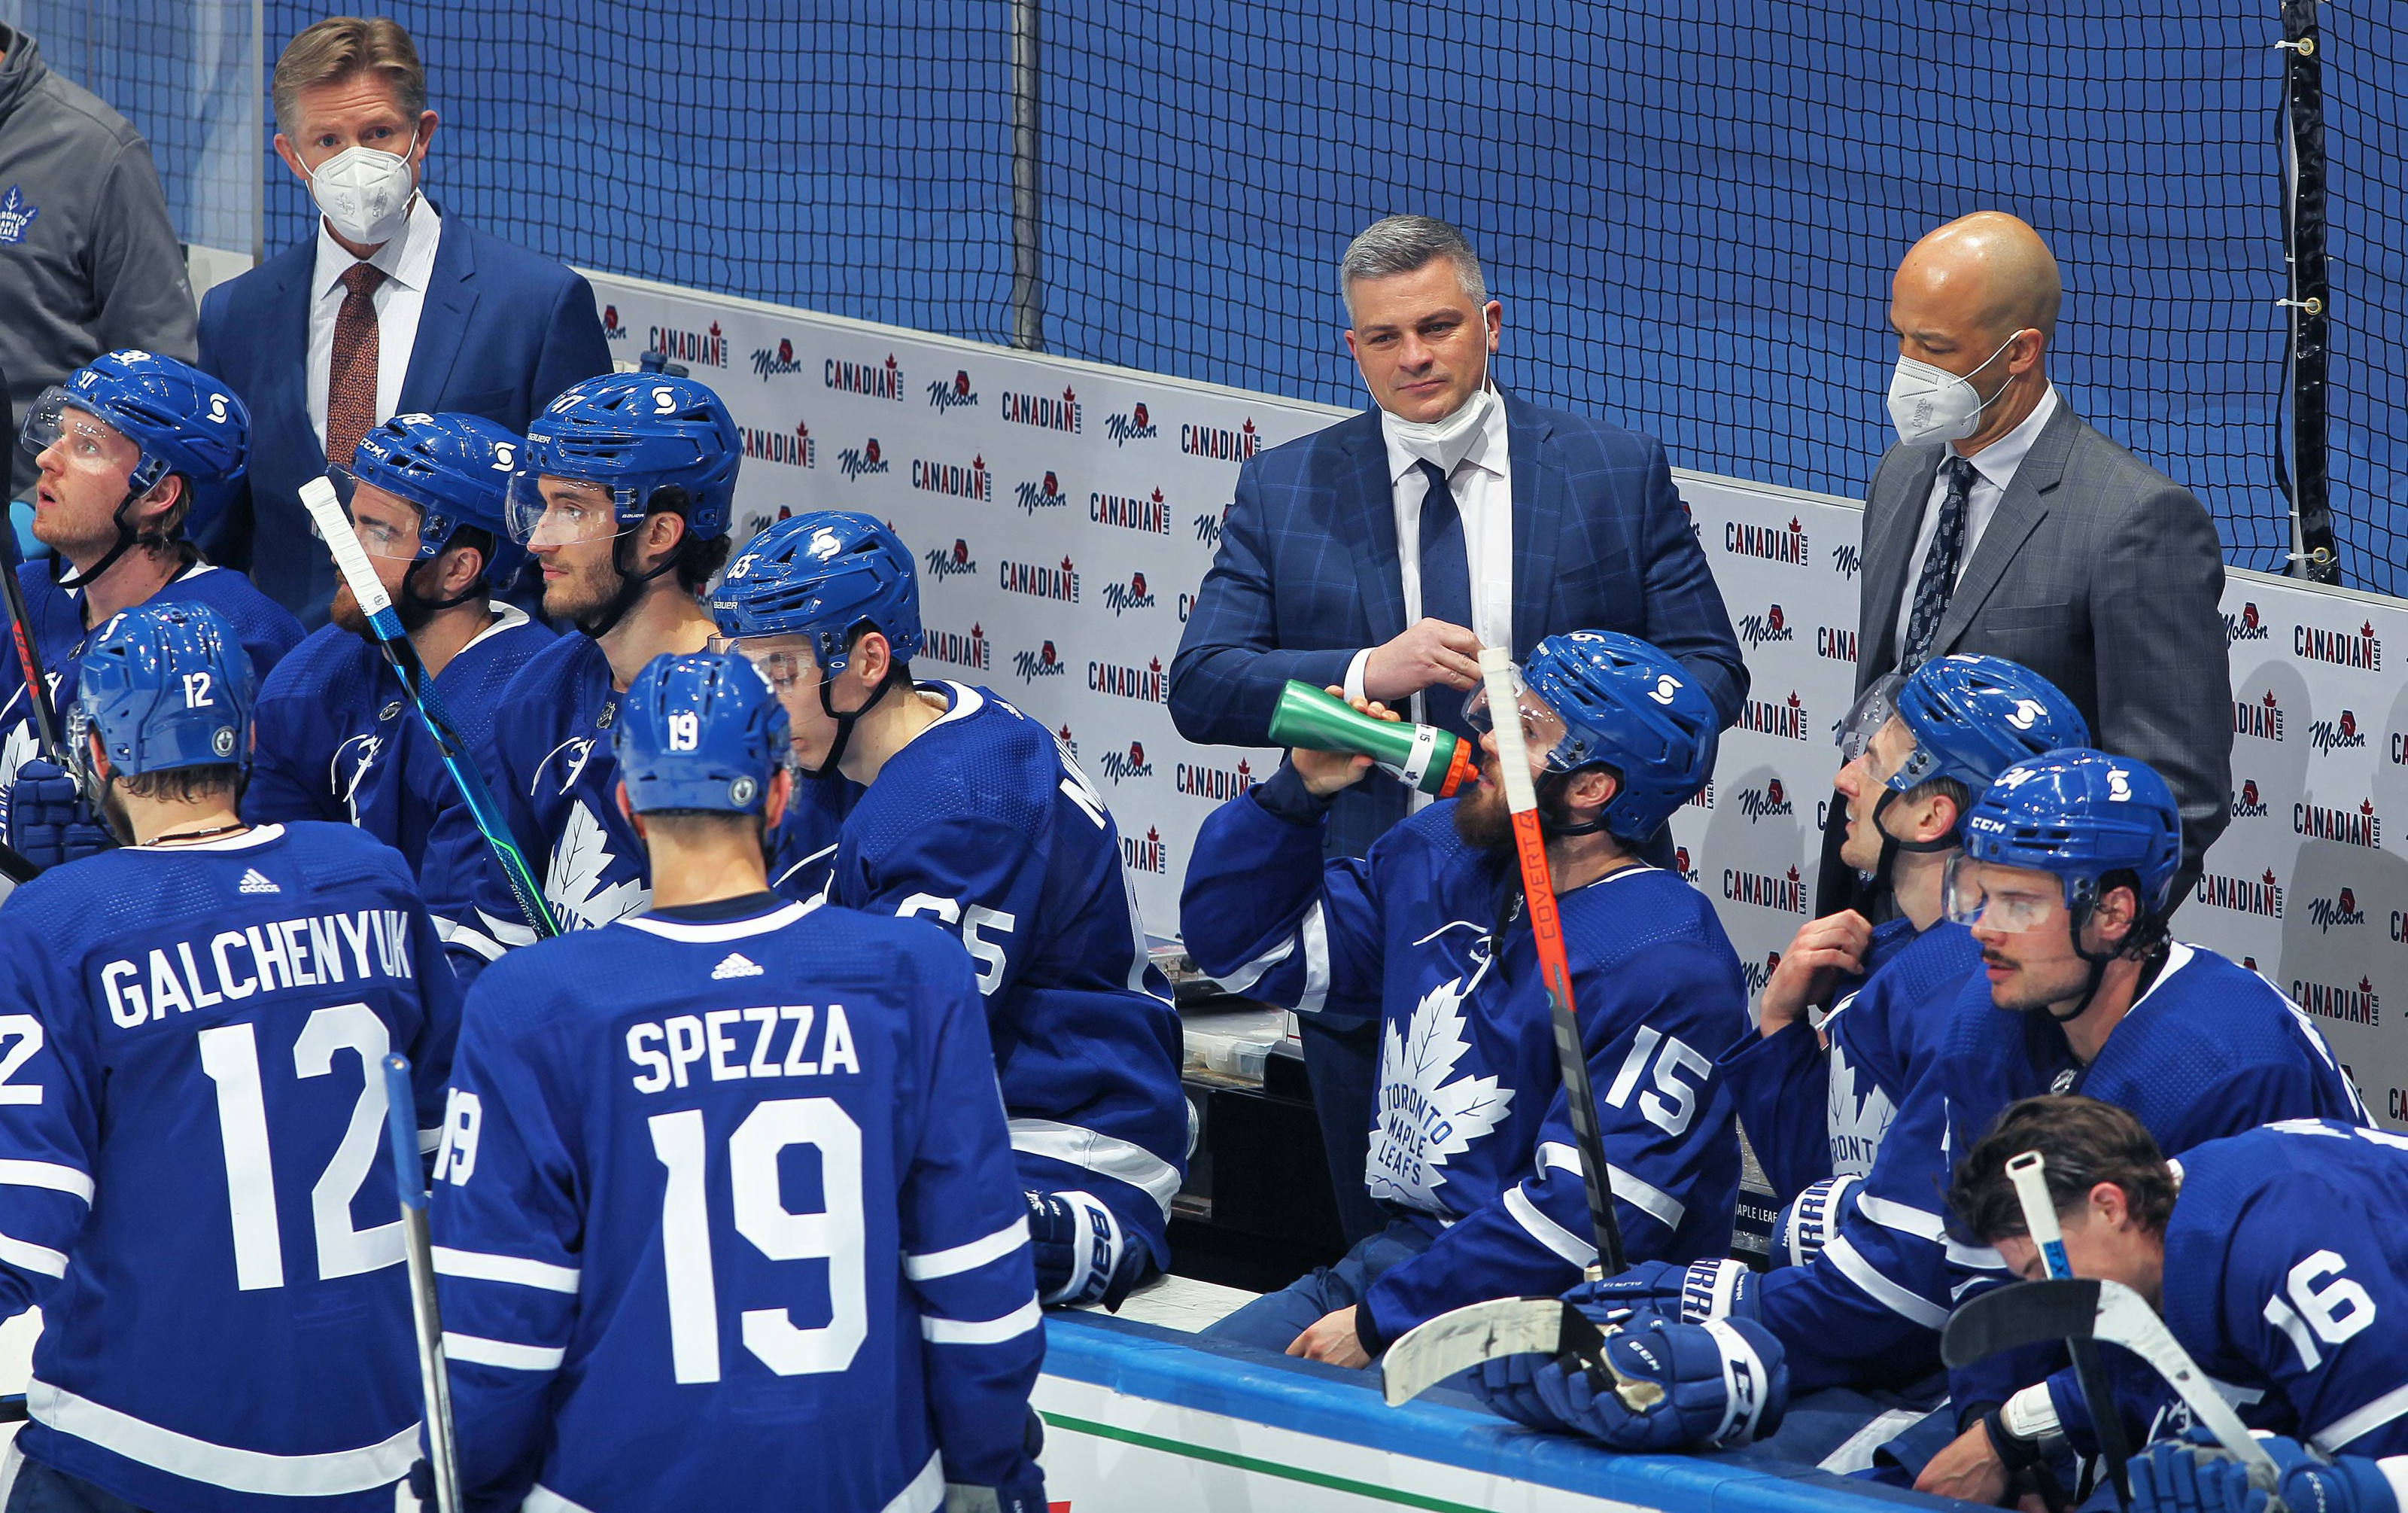 3 Big Changes Toronto Maple Leafs Need to Make This Offseason